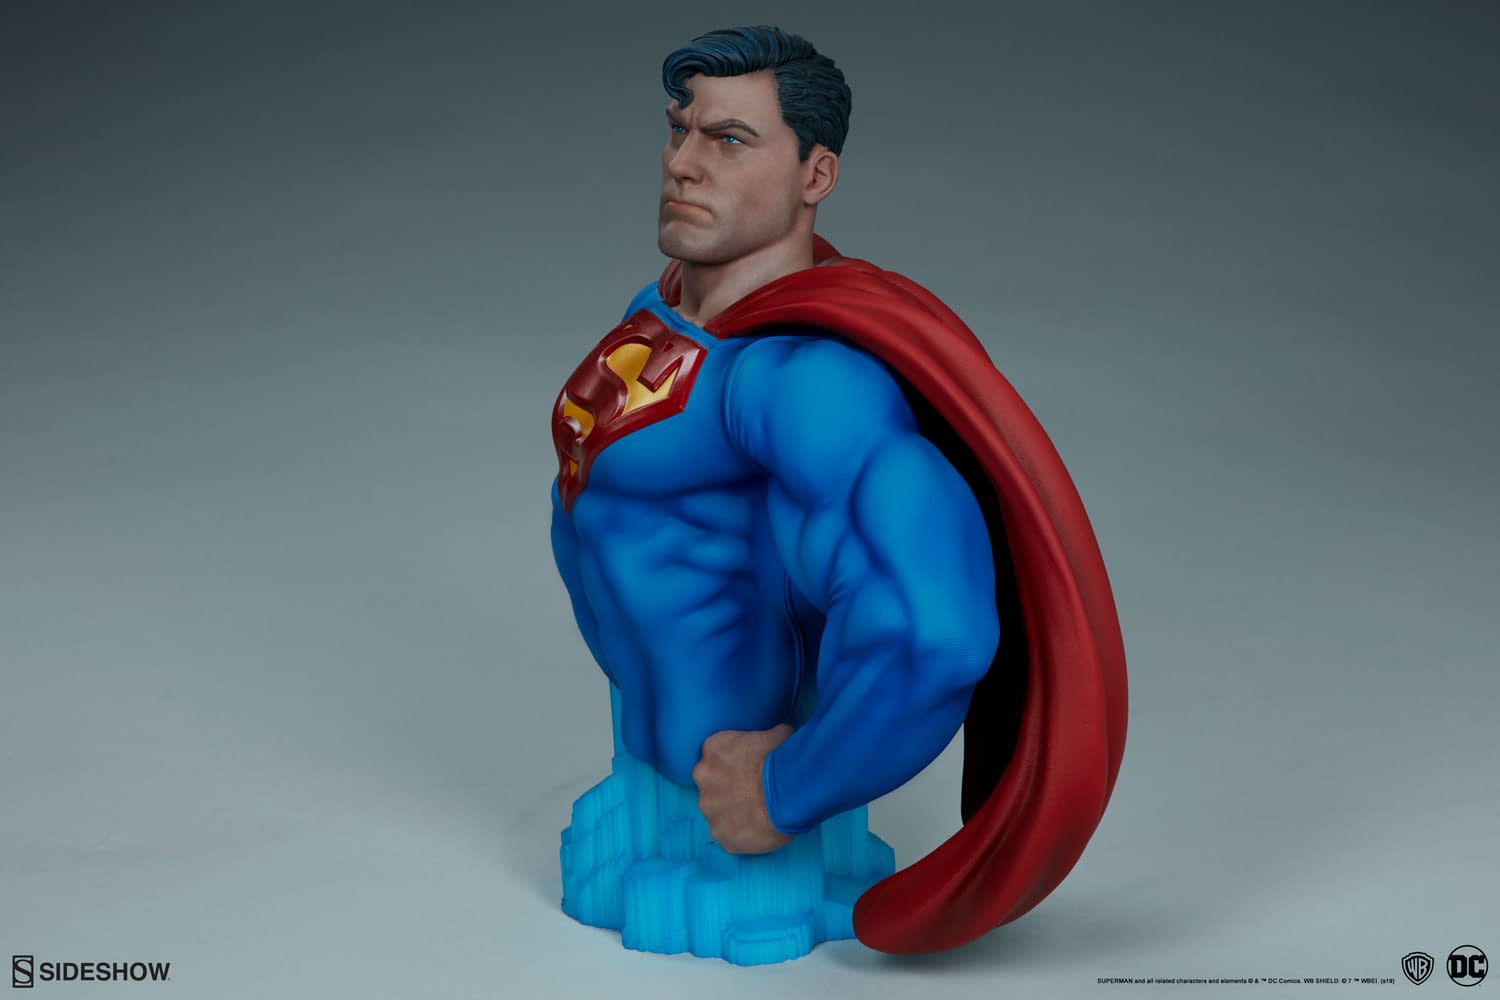 Superman Shows Us the American Way with New Sideshow Bust